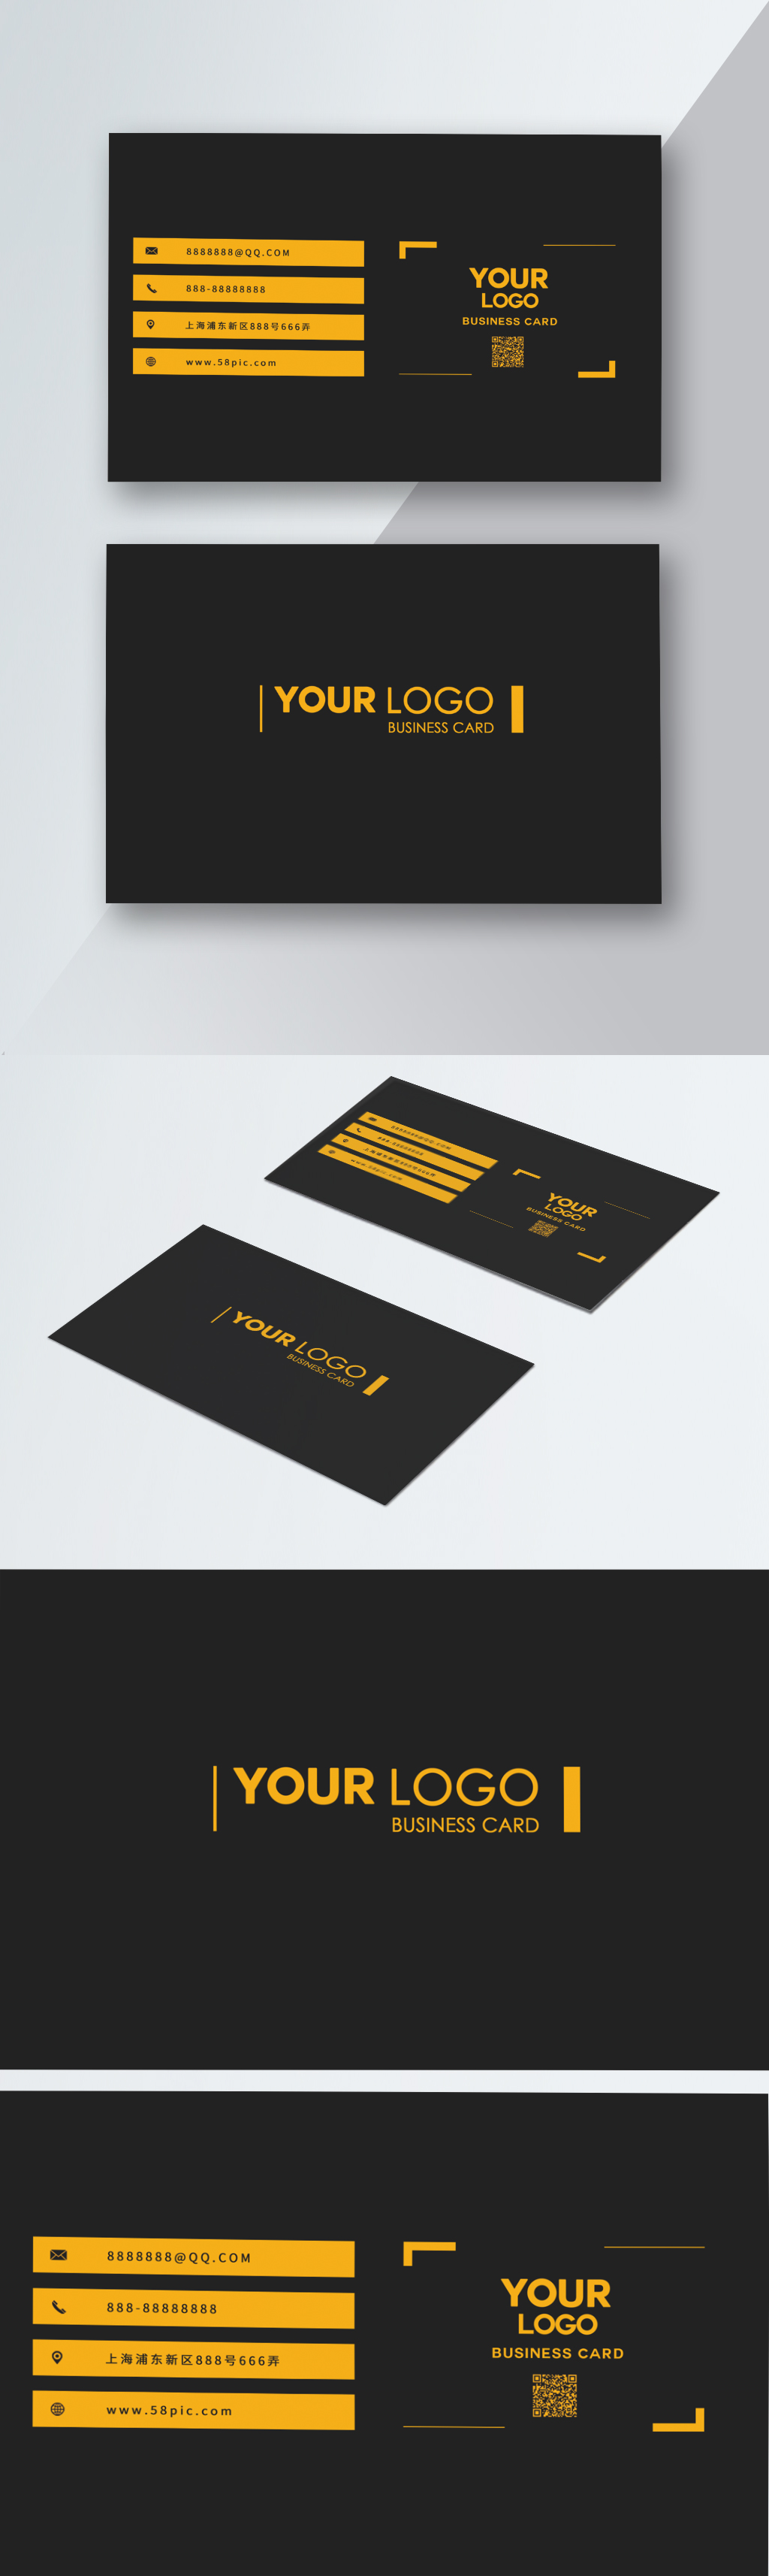 Download Black And Yellow Business Card Template Image Picture Free Download 450003125 Lovepik Com PSD Mockup Templates